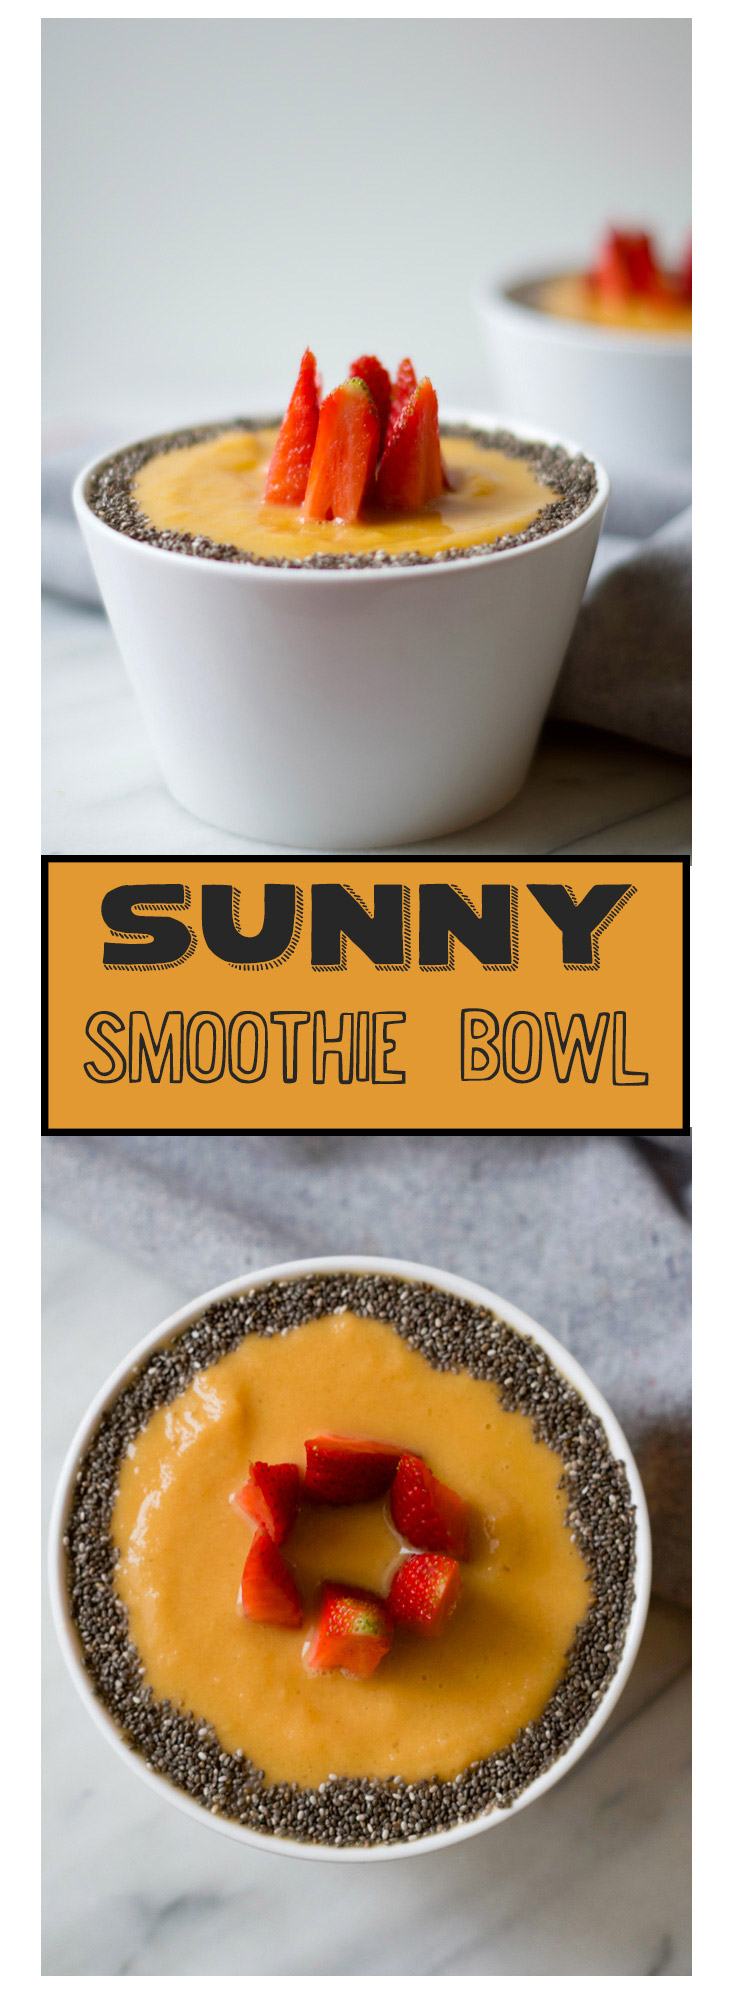 SUNNY SMOOTHIE BOWL BY BEAUTIFUL INGREDIENT